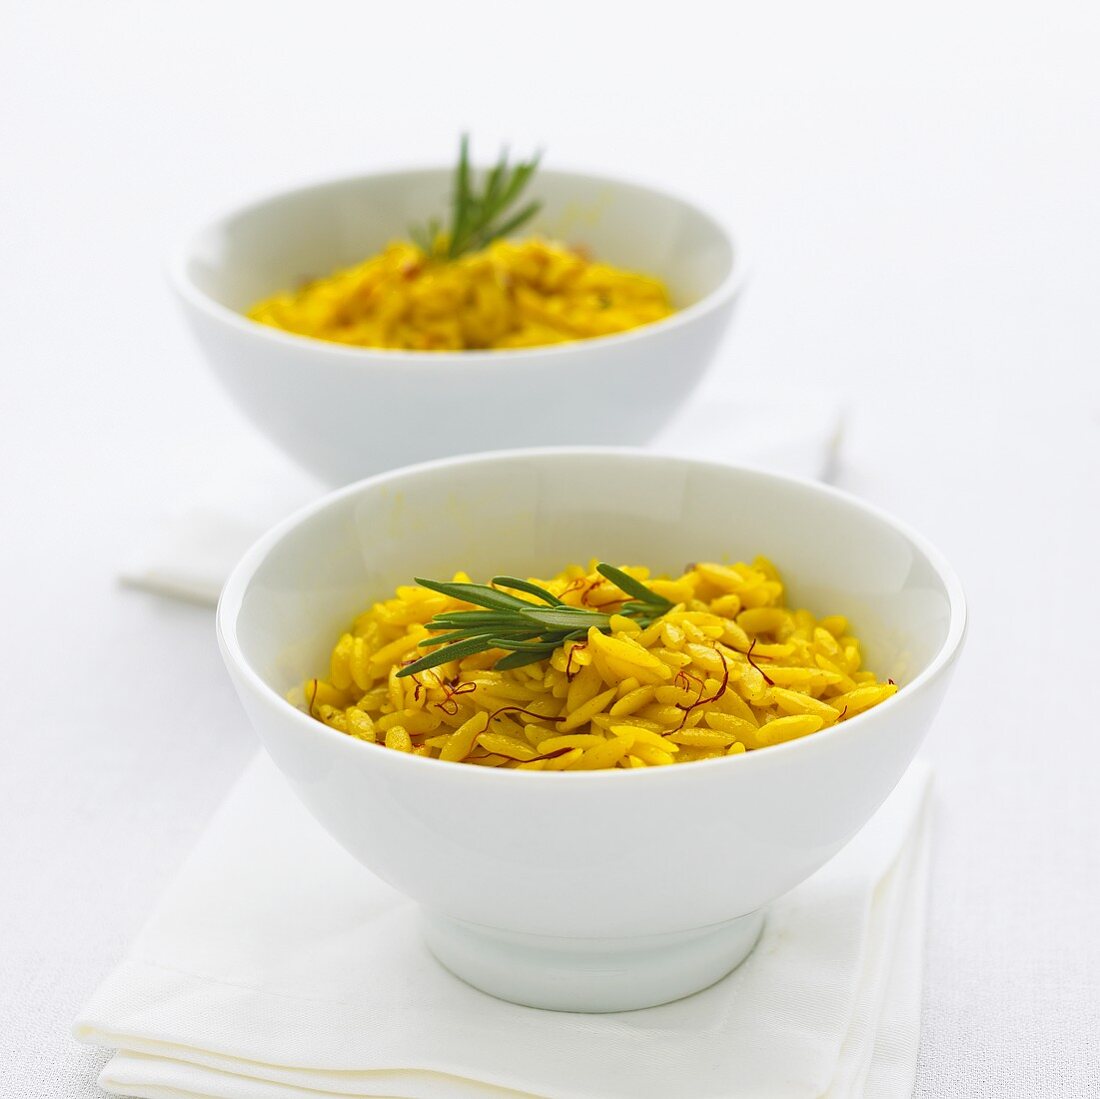 Two bowls of saffron rice with rosemary